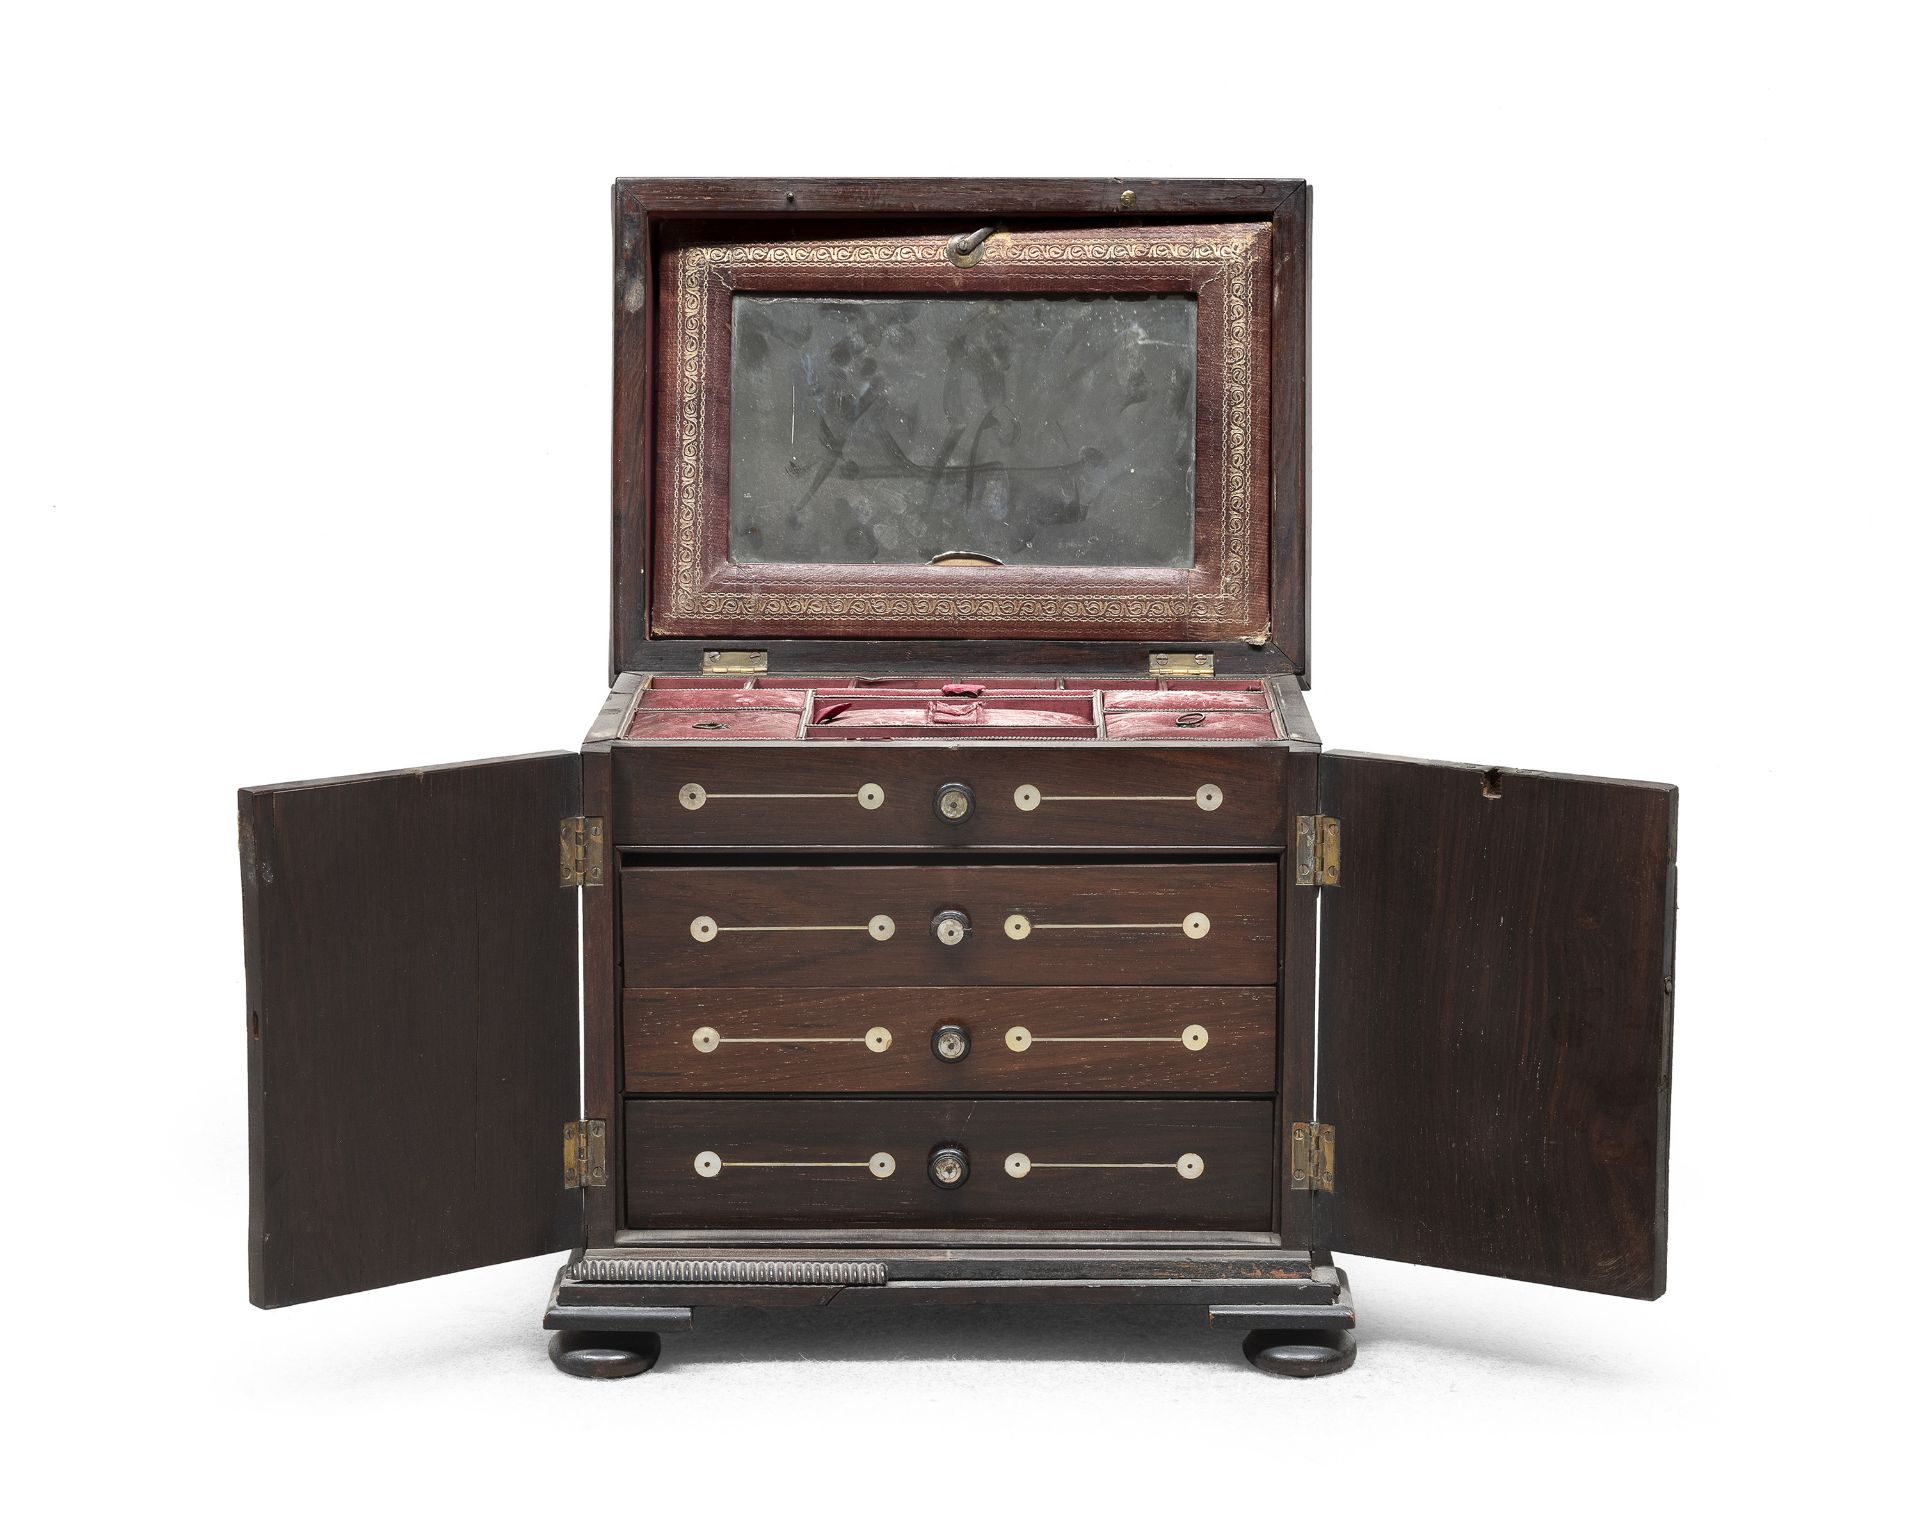 SMALL COIN CABINET 19th CENTURY - Image 2 of 2